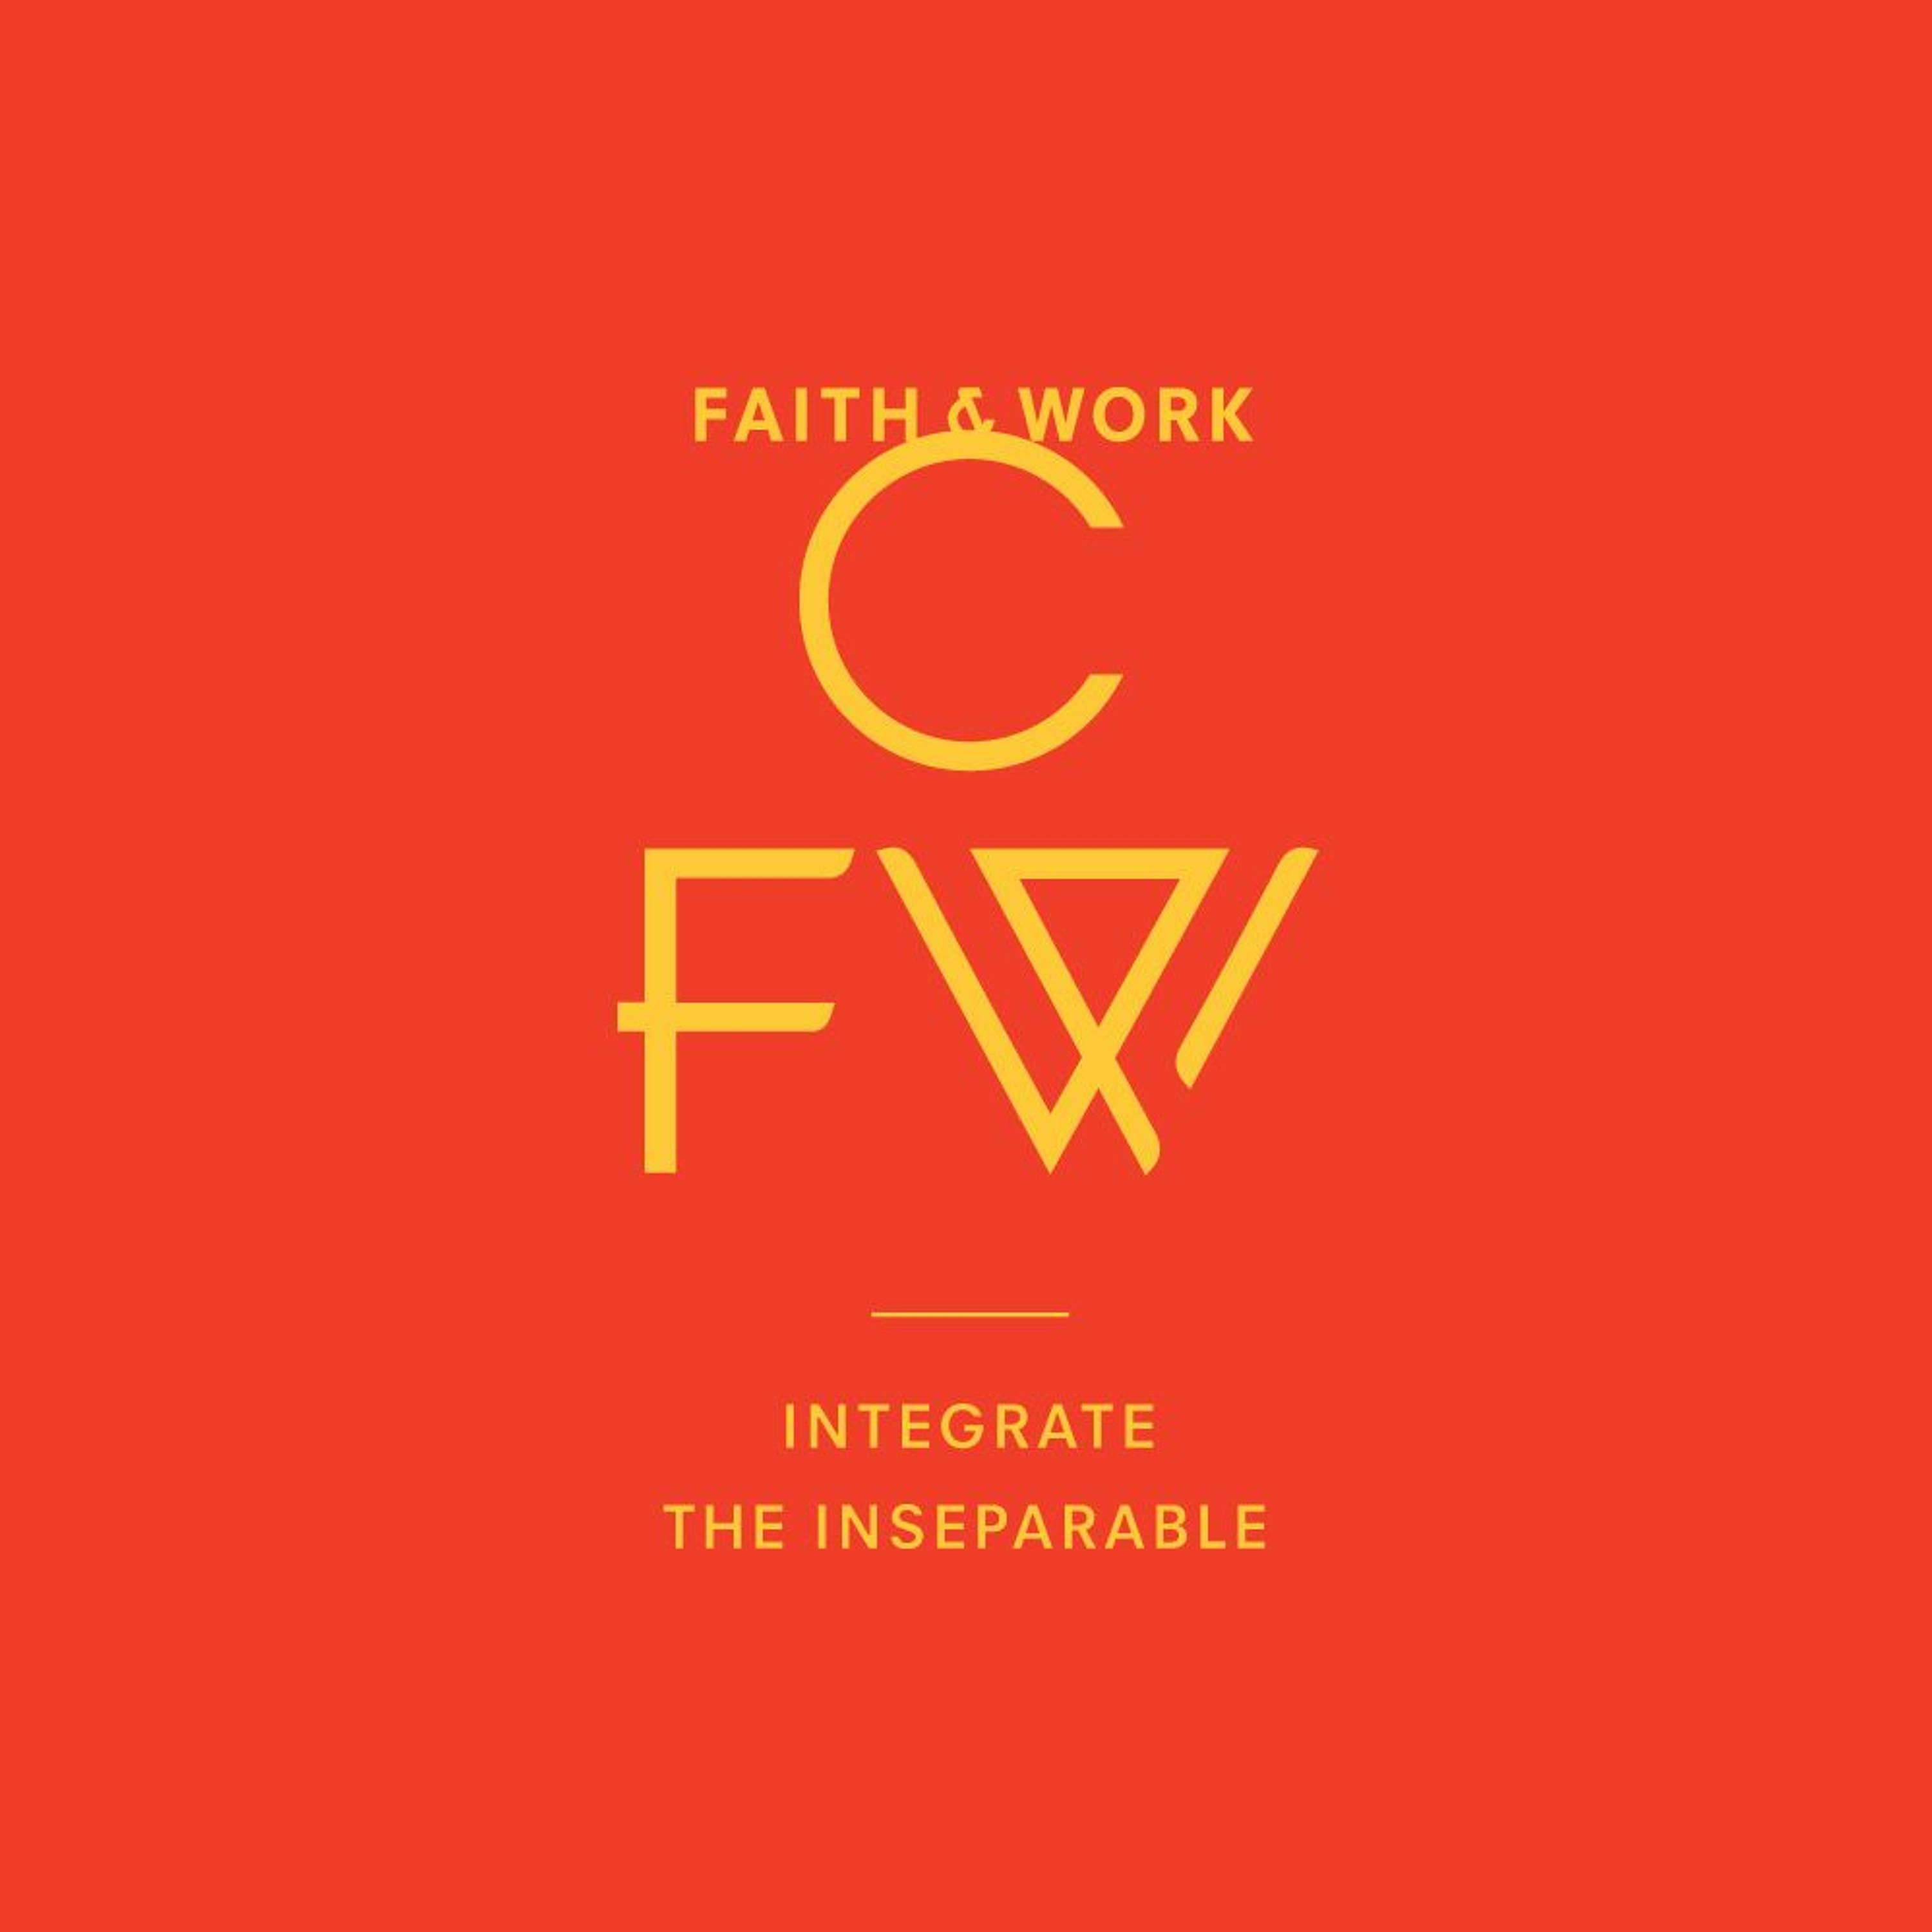 A New Faith And Work Movement by David H. Kim